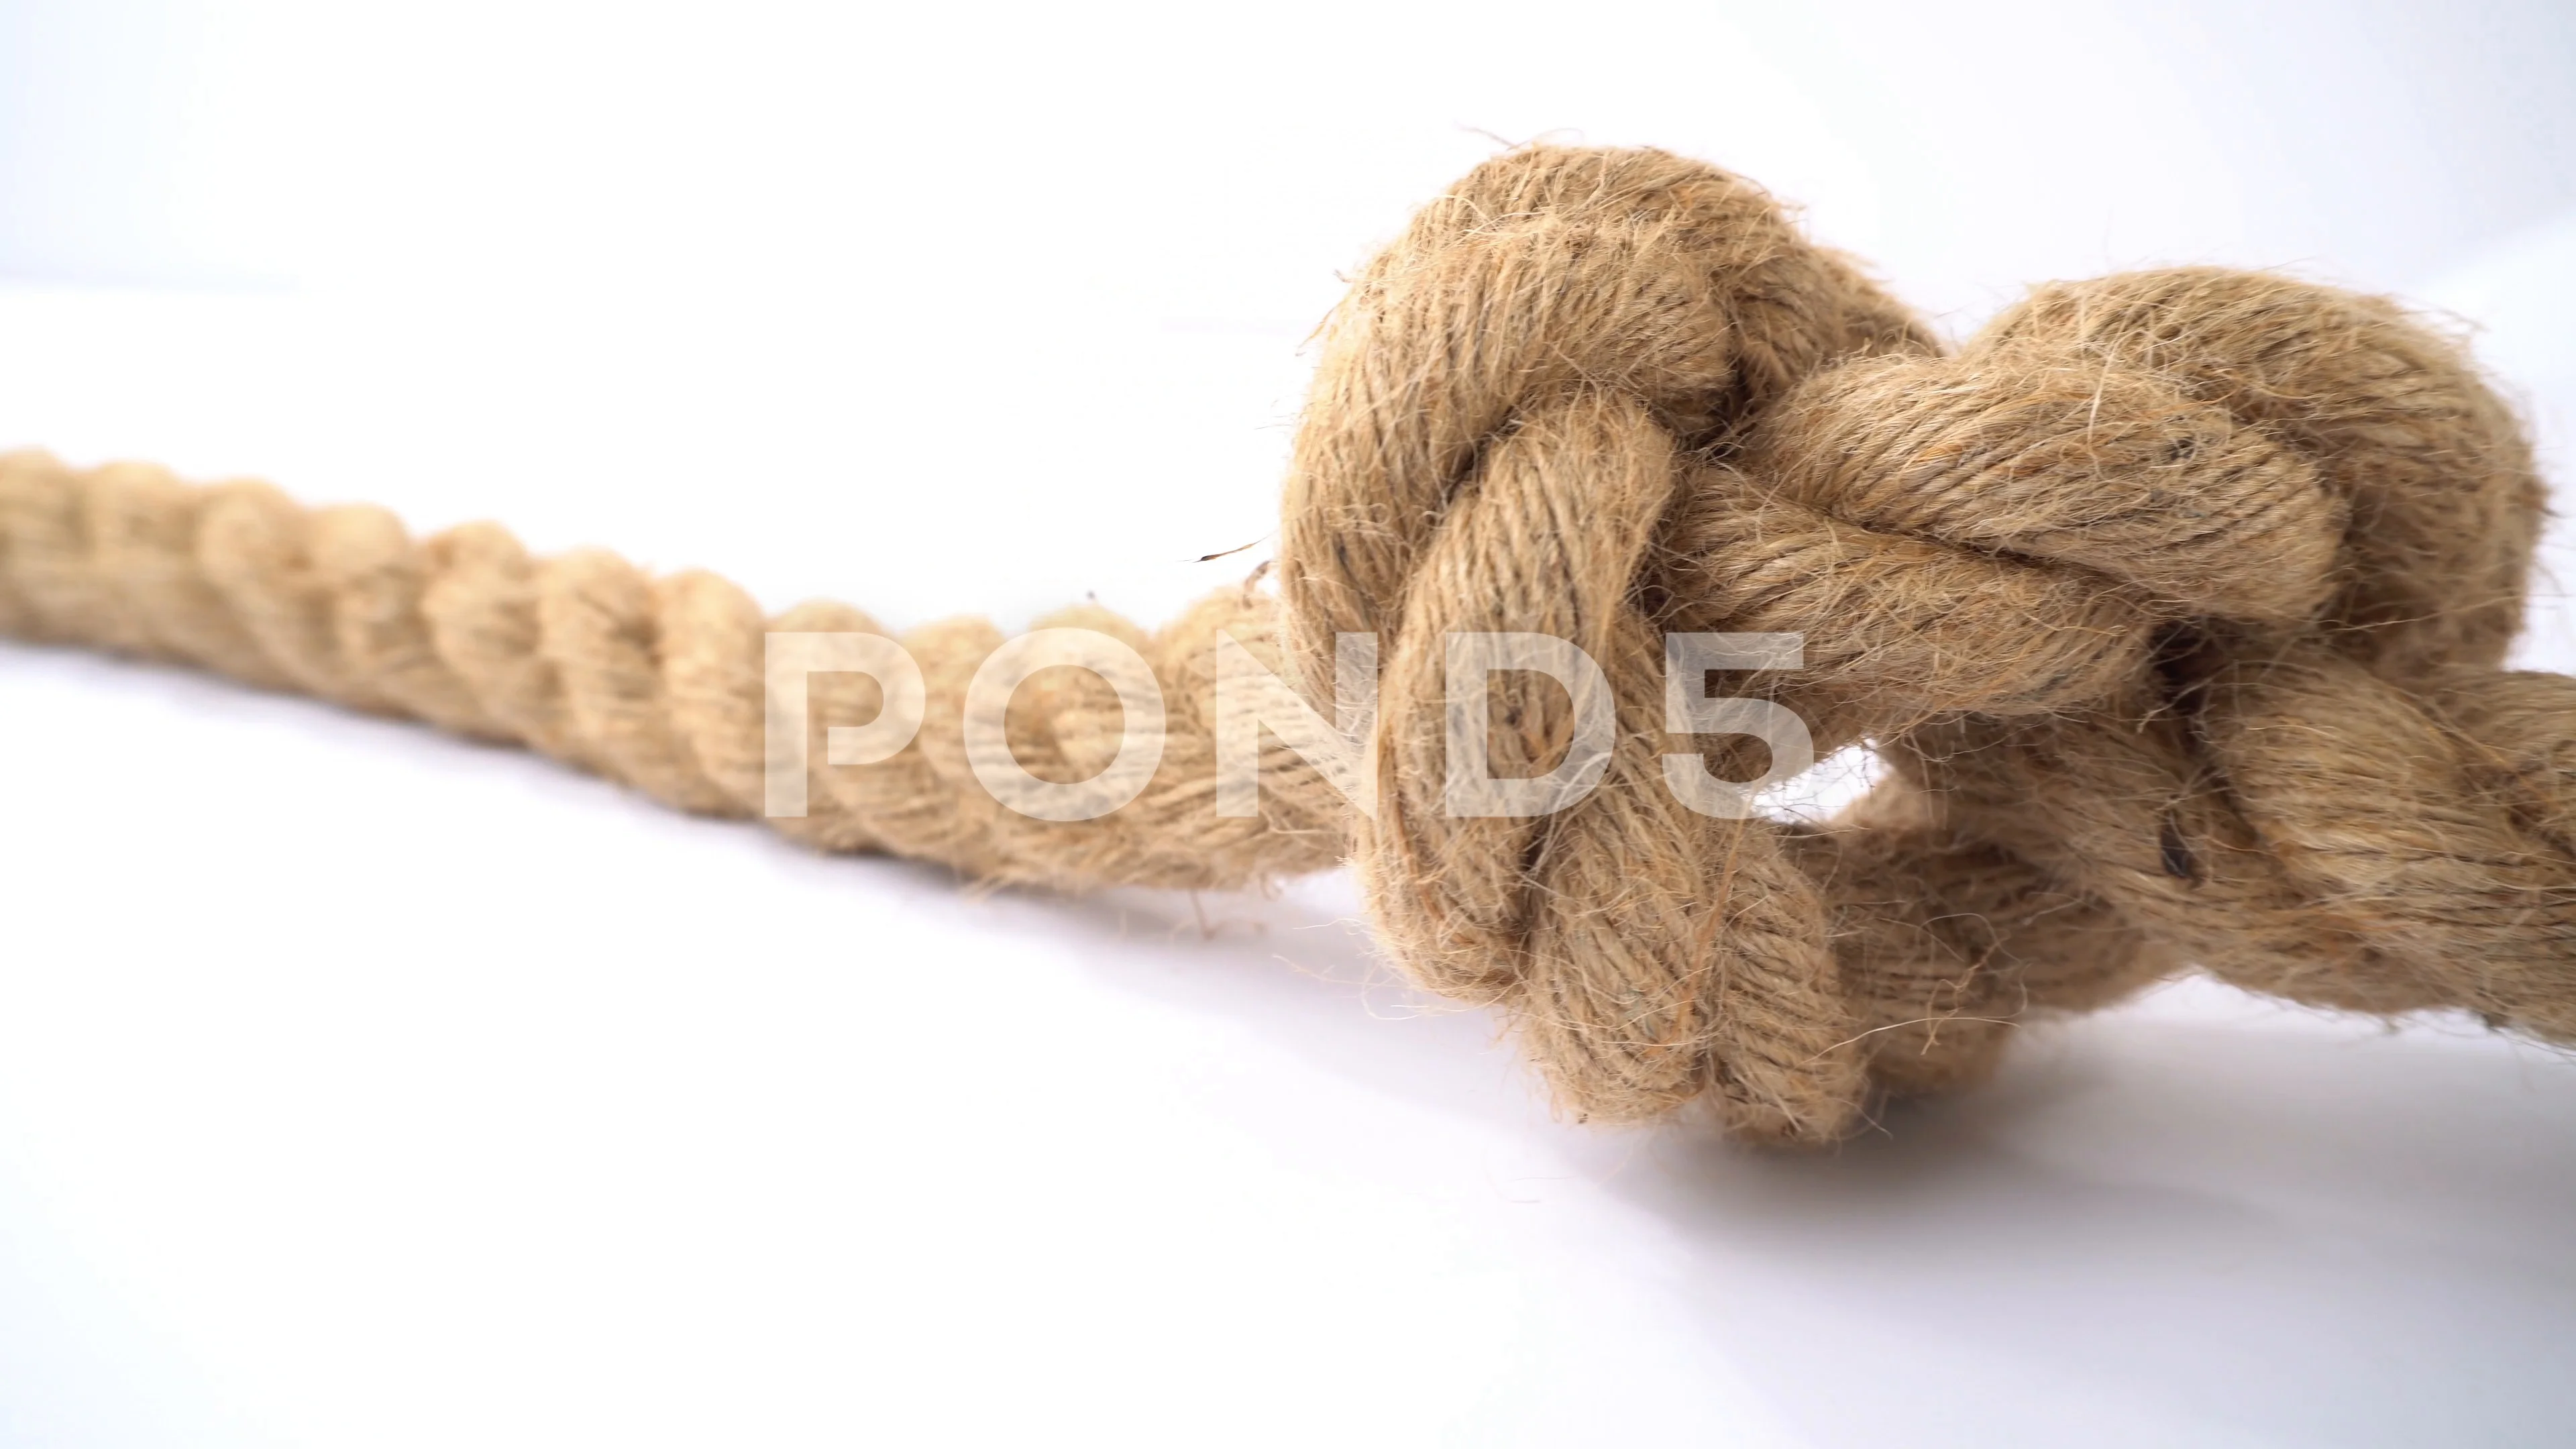 https://images.pond5.com/strong-rope-knot-isolated-white-footage-128206817_prevstill.jpeg